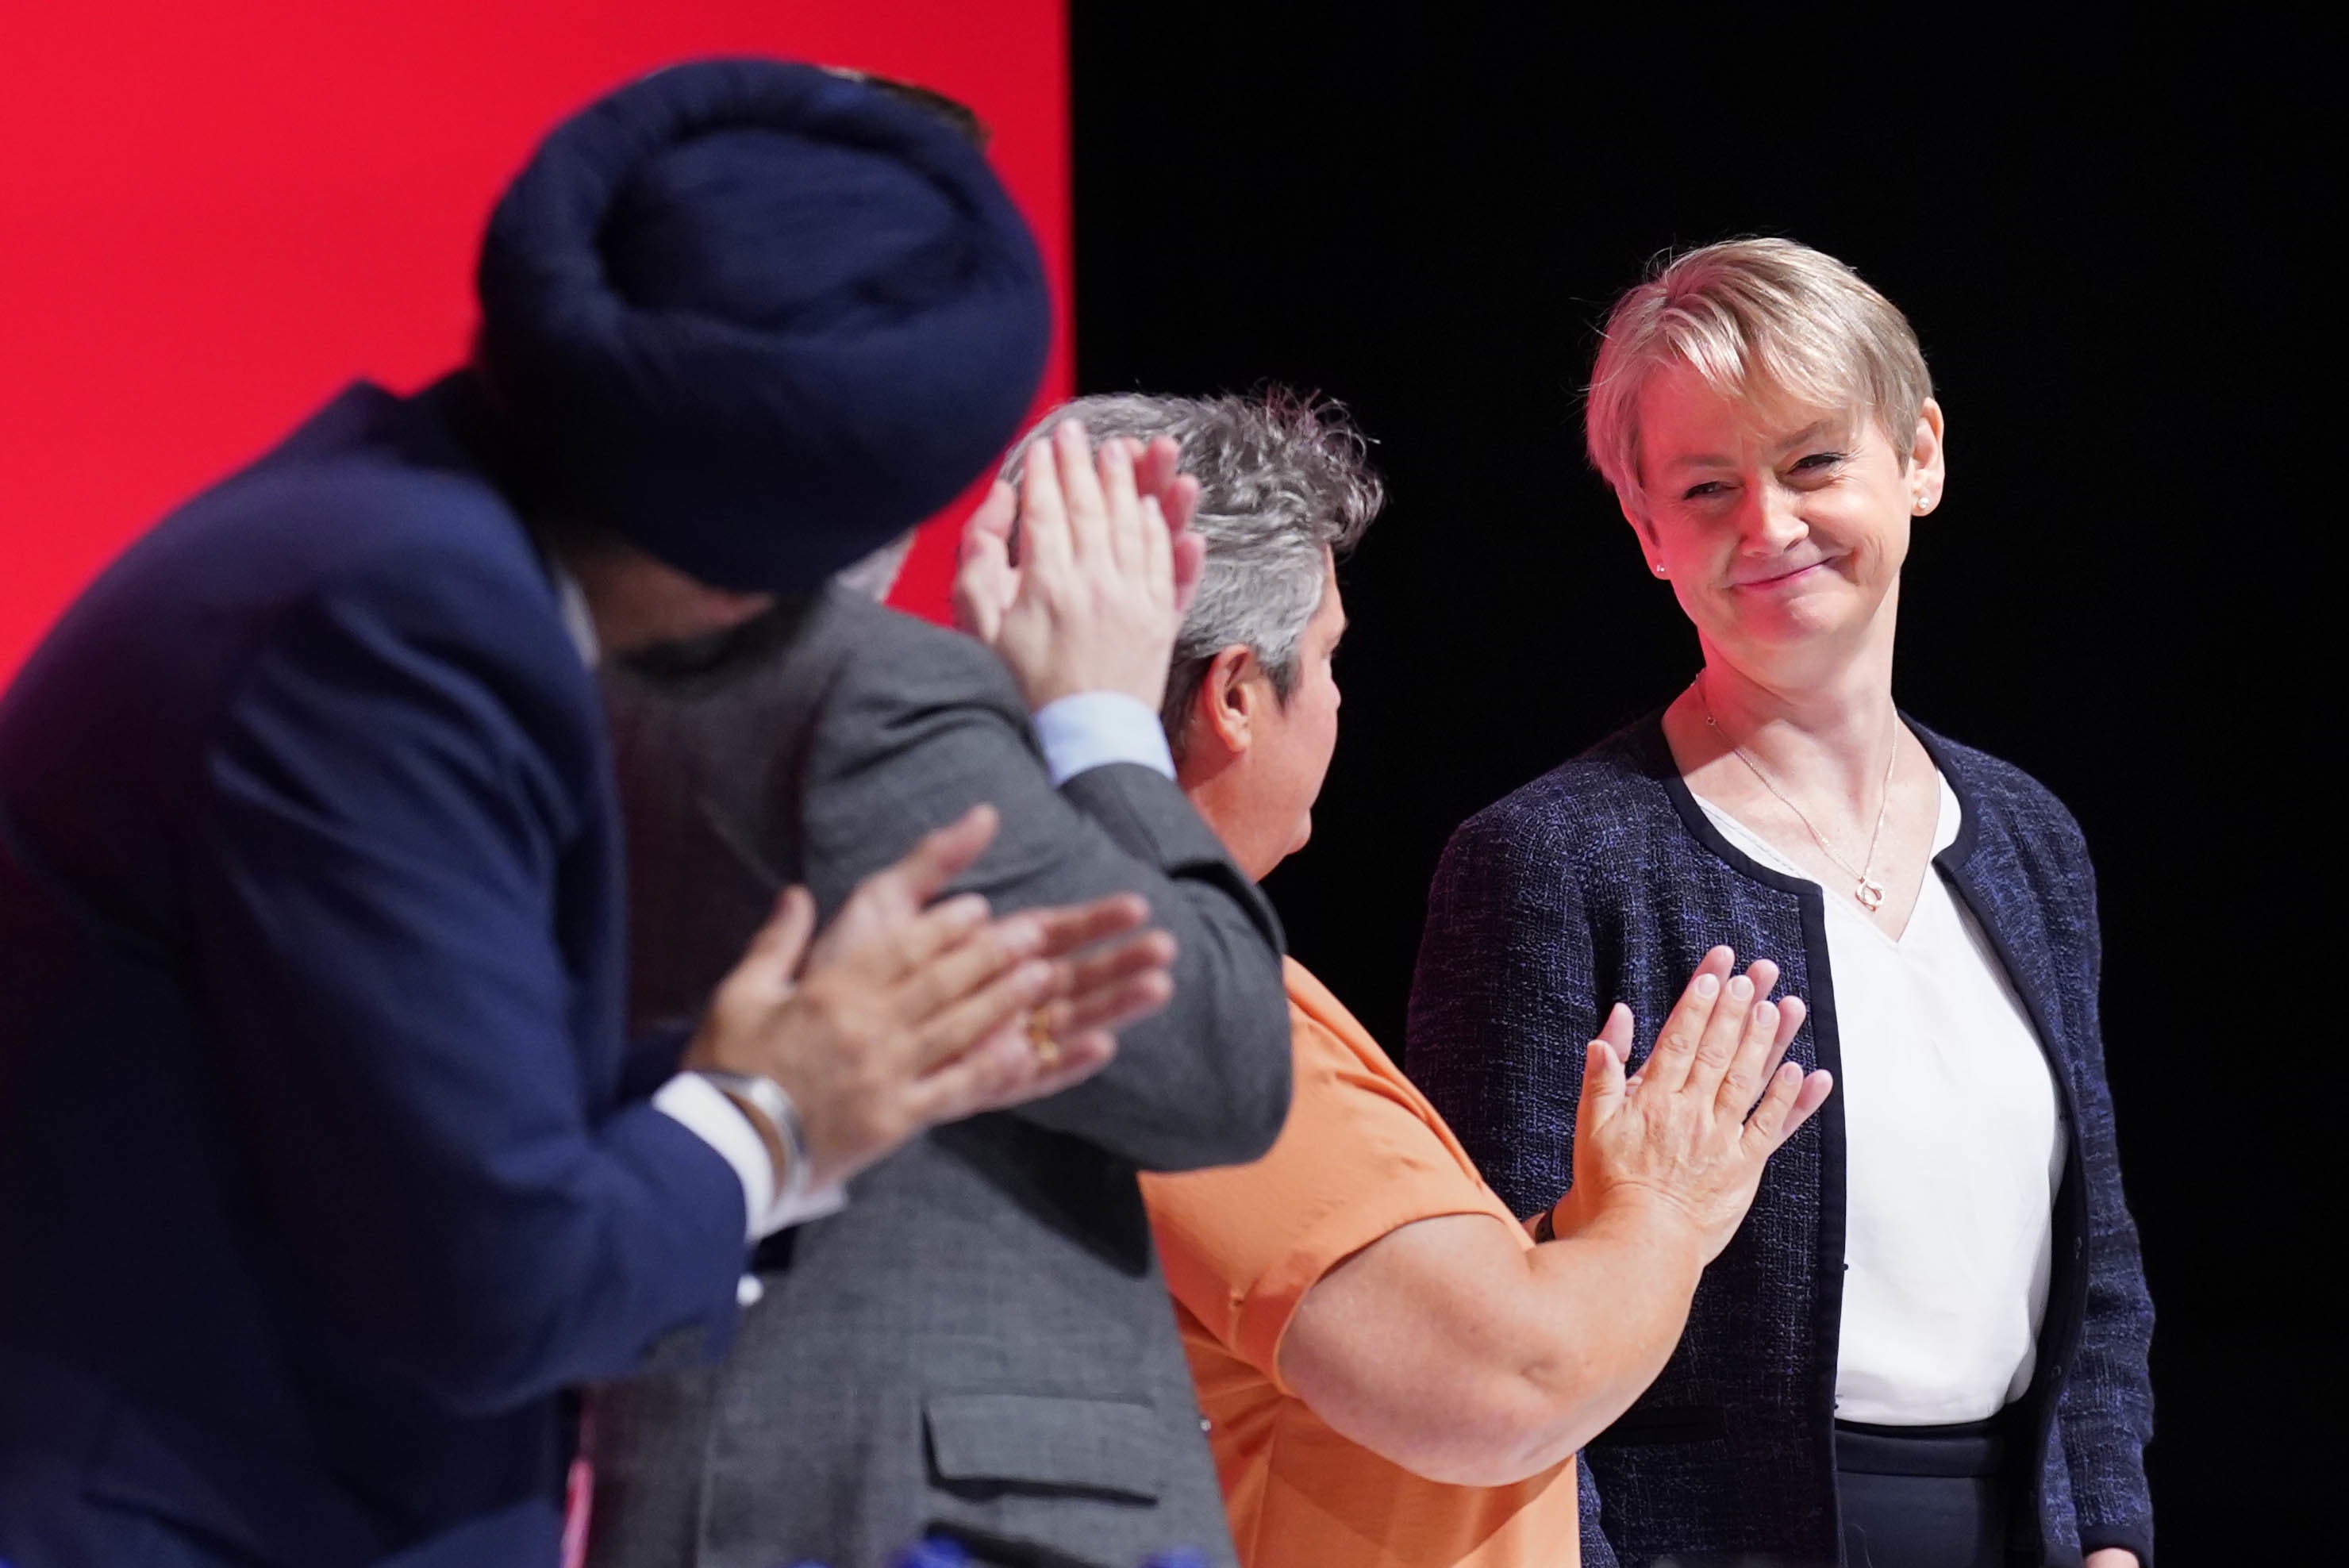 Shadow home secretary Yvette Cooper is applauded after her speech at the Labour Party conference (Stefan Rousseau/PA)